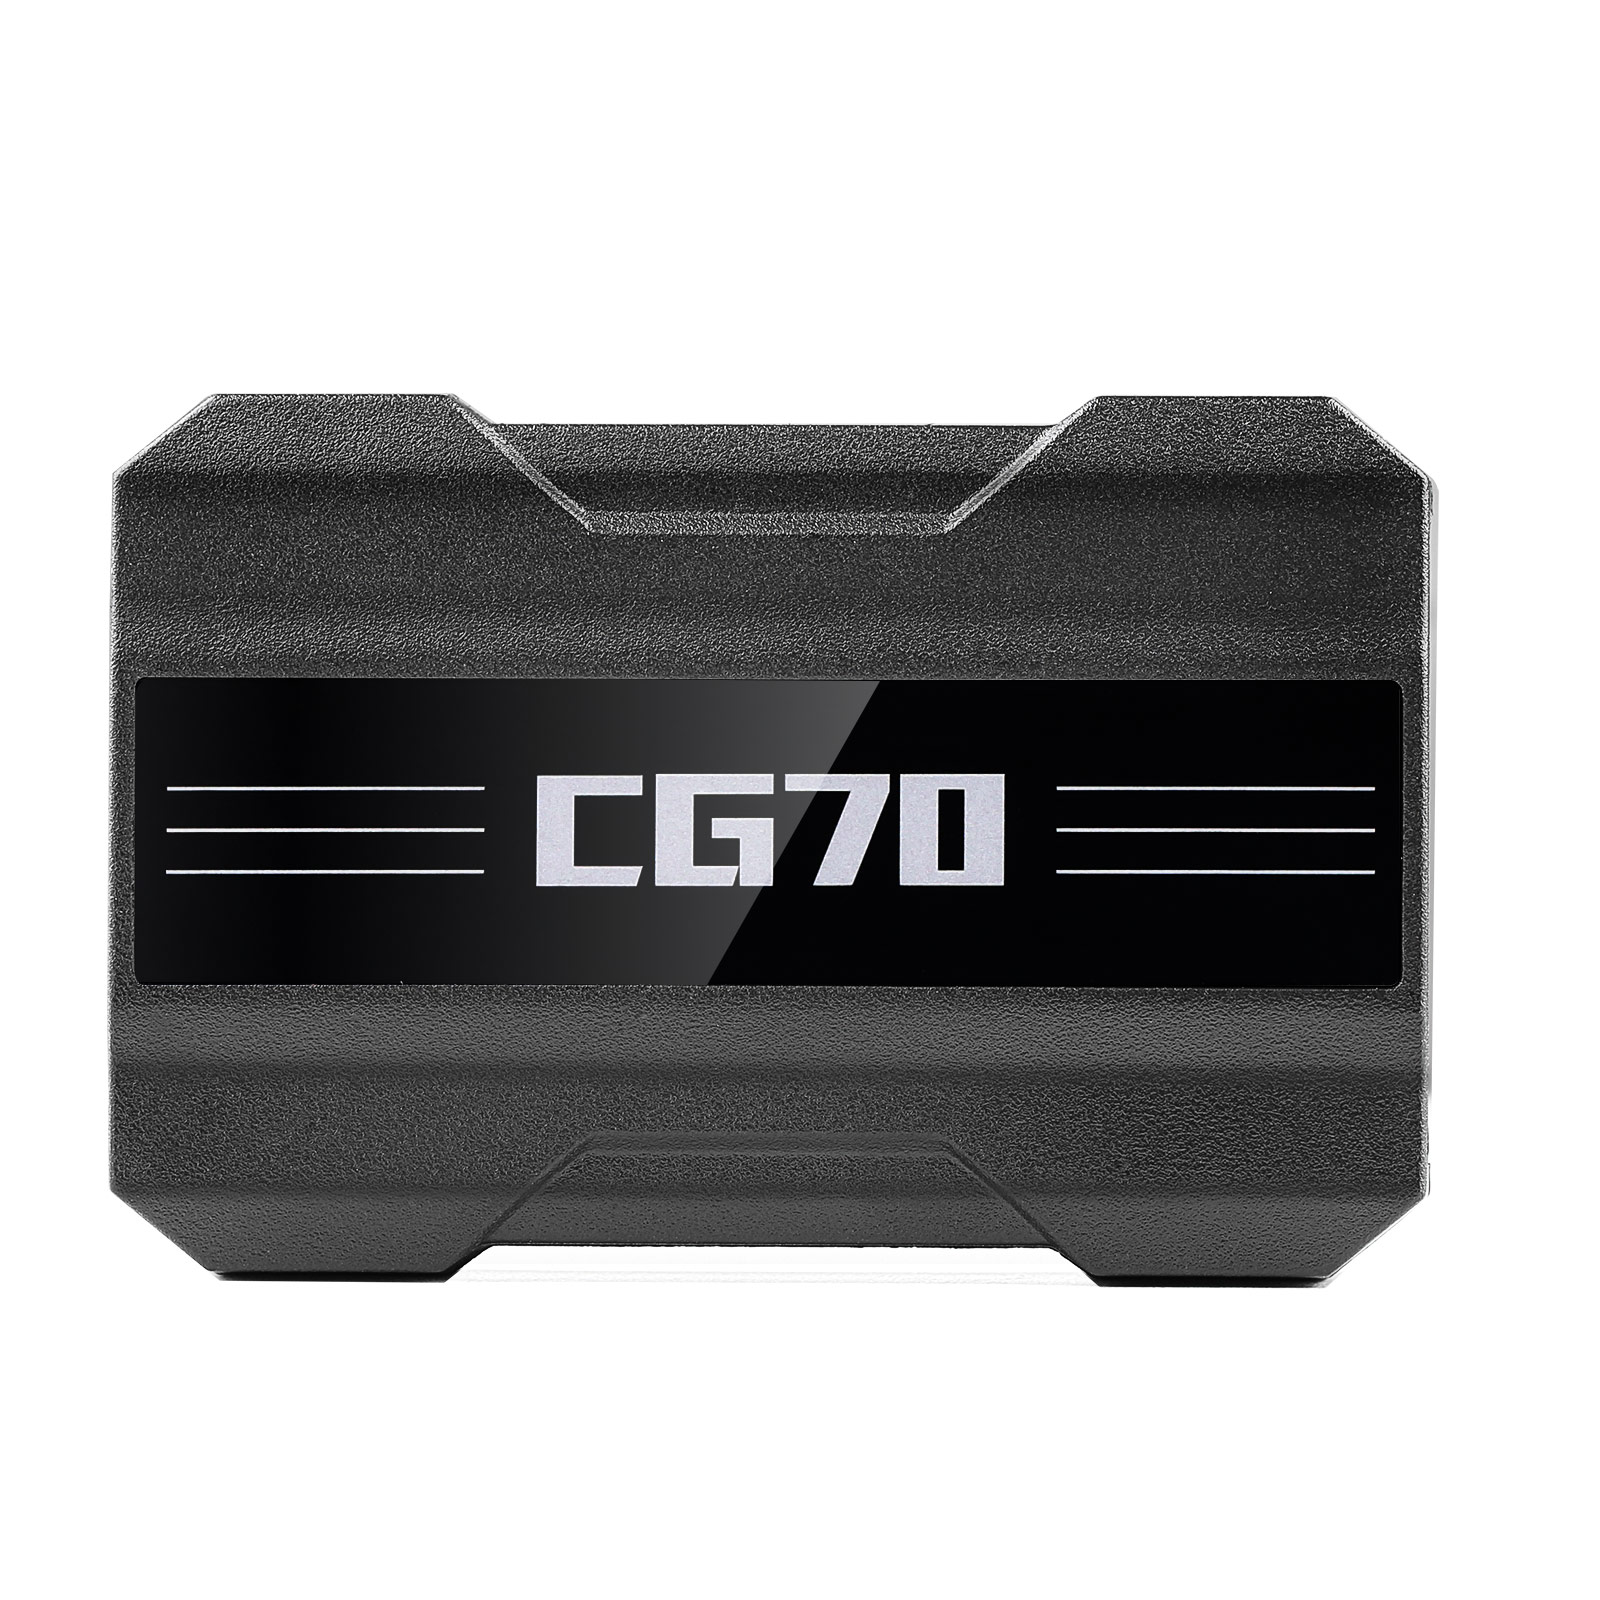 2023 CGDI CG70 Airbag Reset Tool Clear Fault Codes One Key No Welding No Disassembly